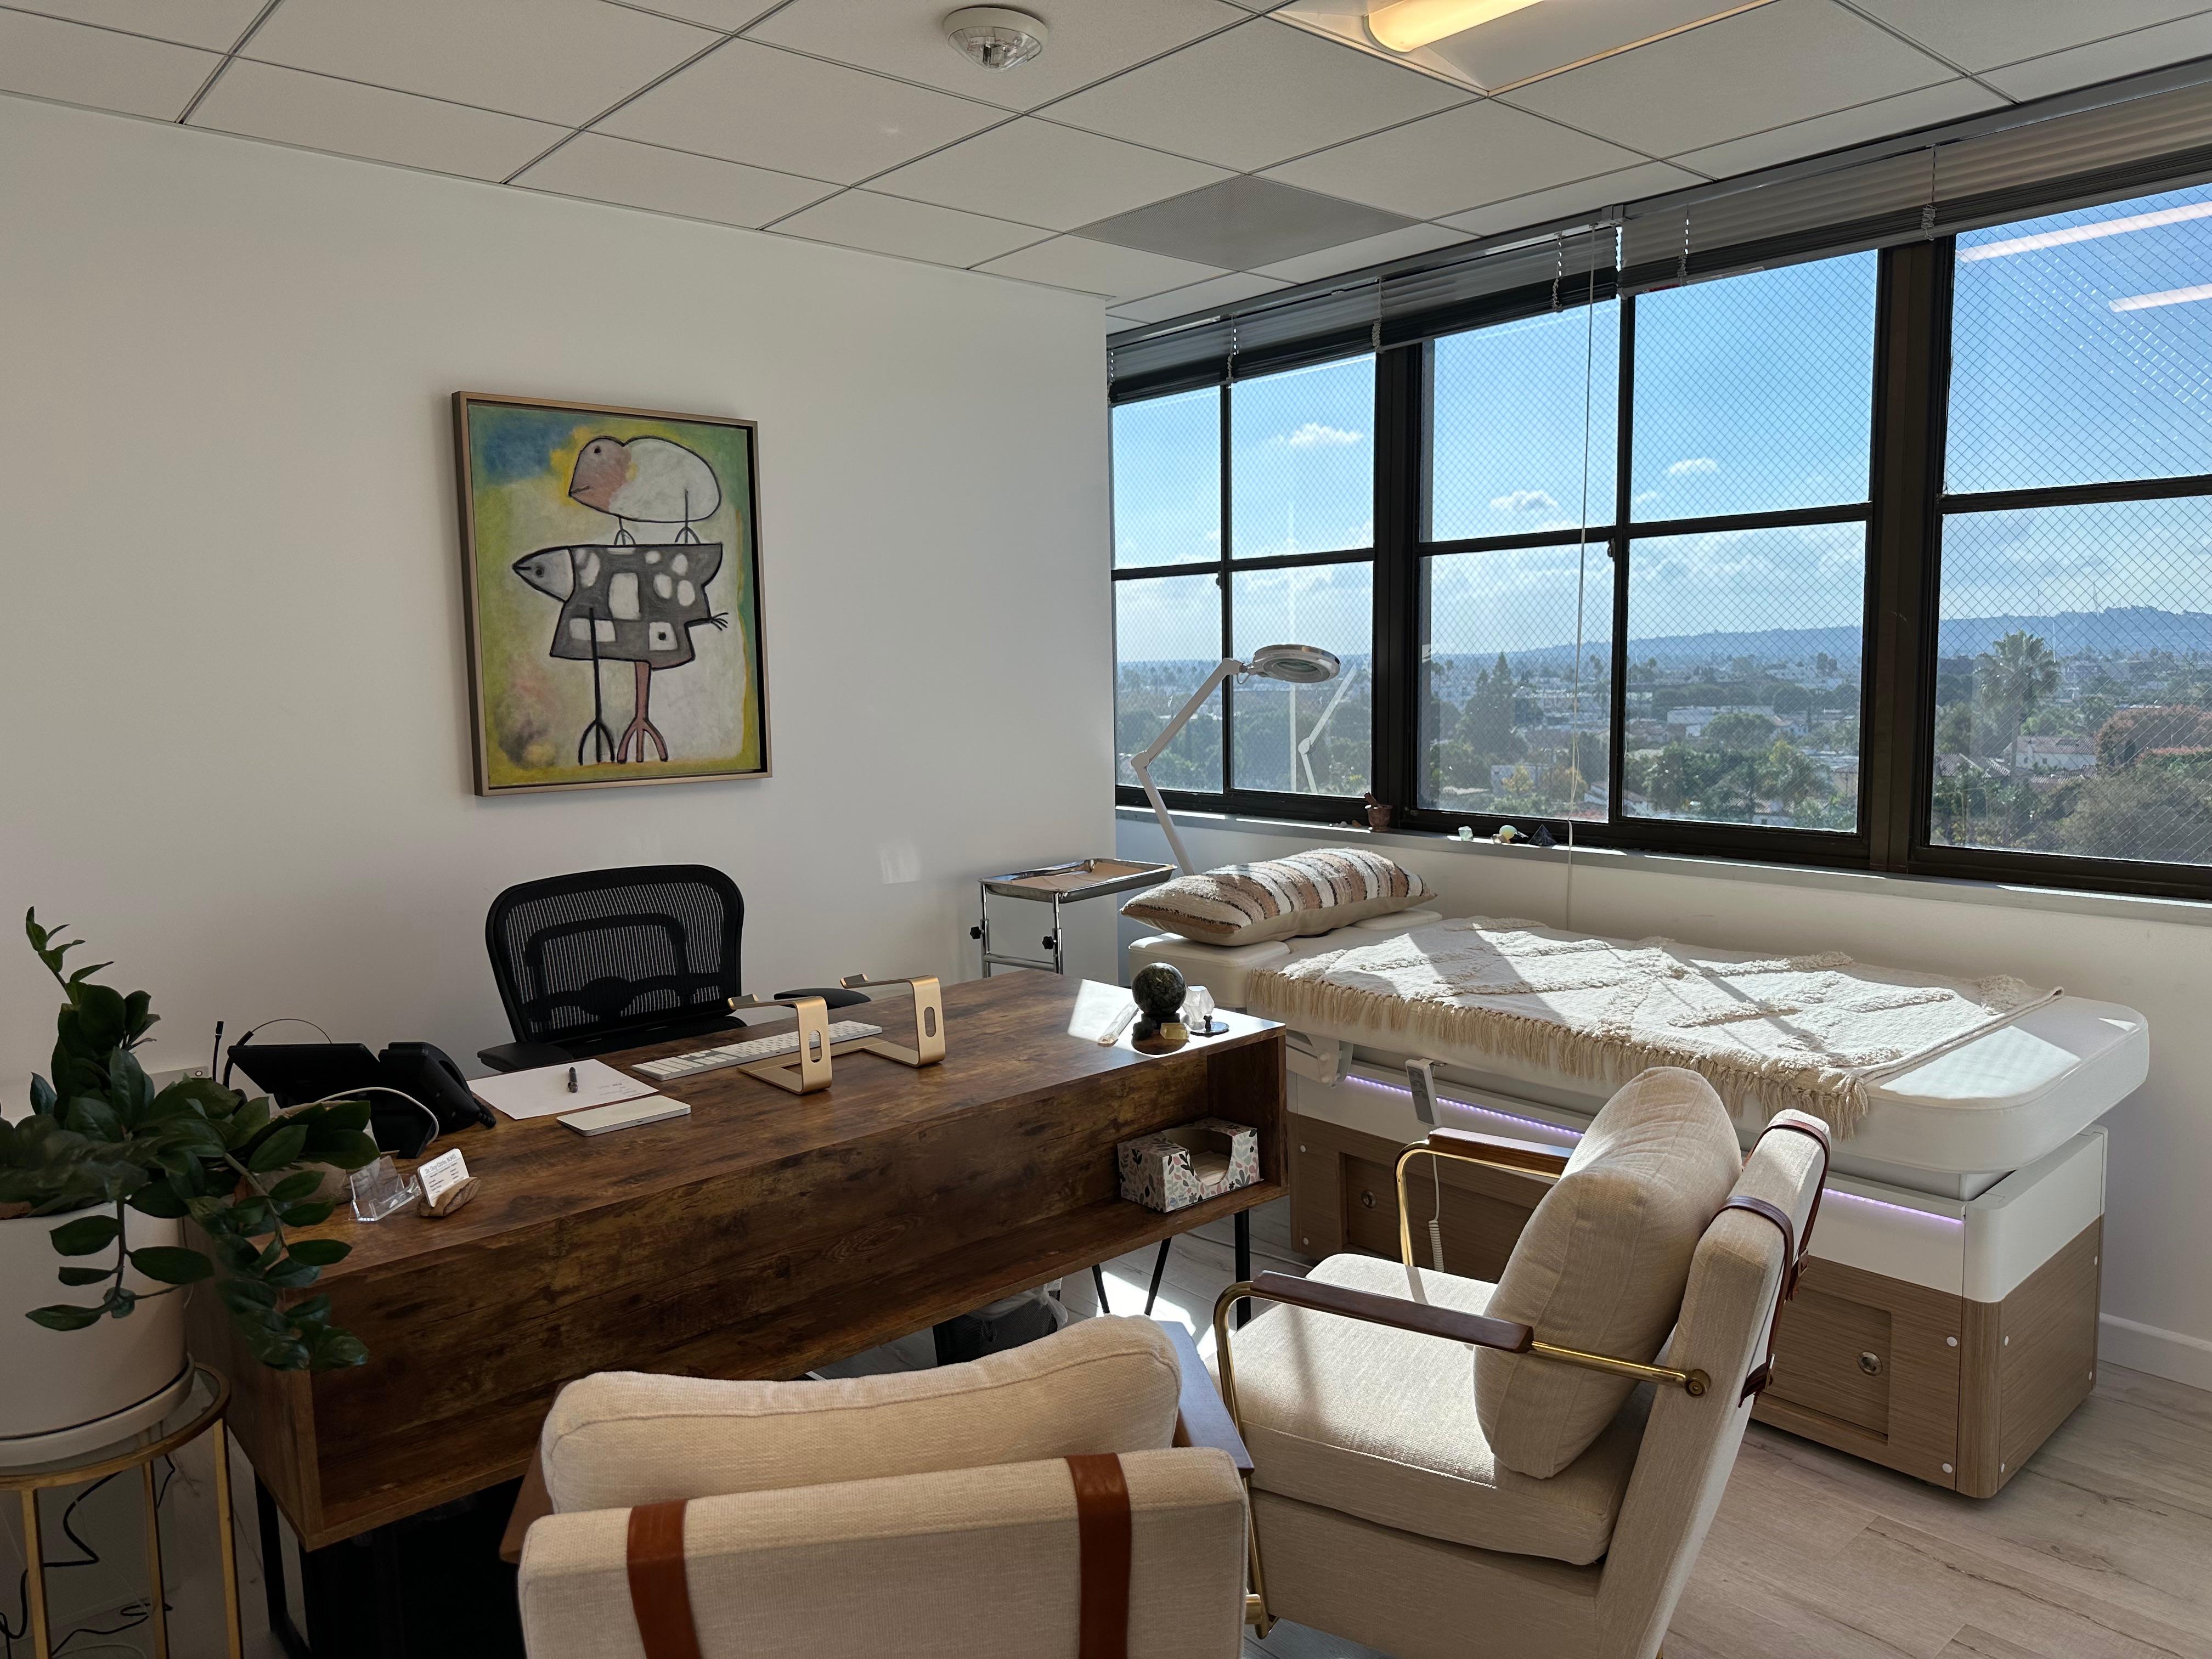 Best peptide IV therapy in Los Angeles. Patient room view of Beverly hills.